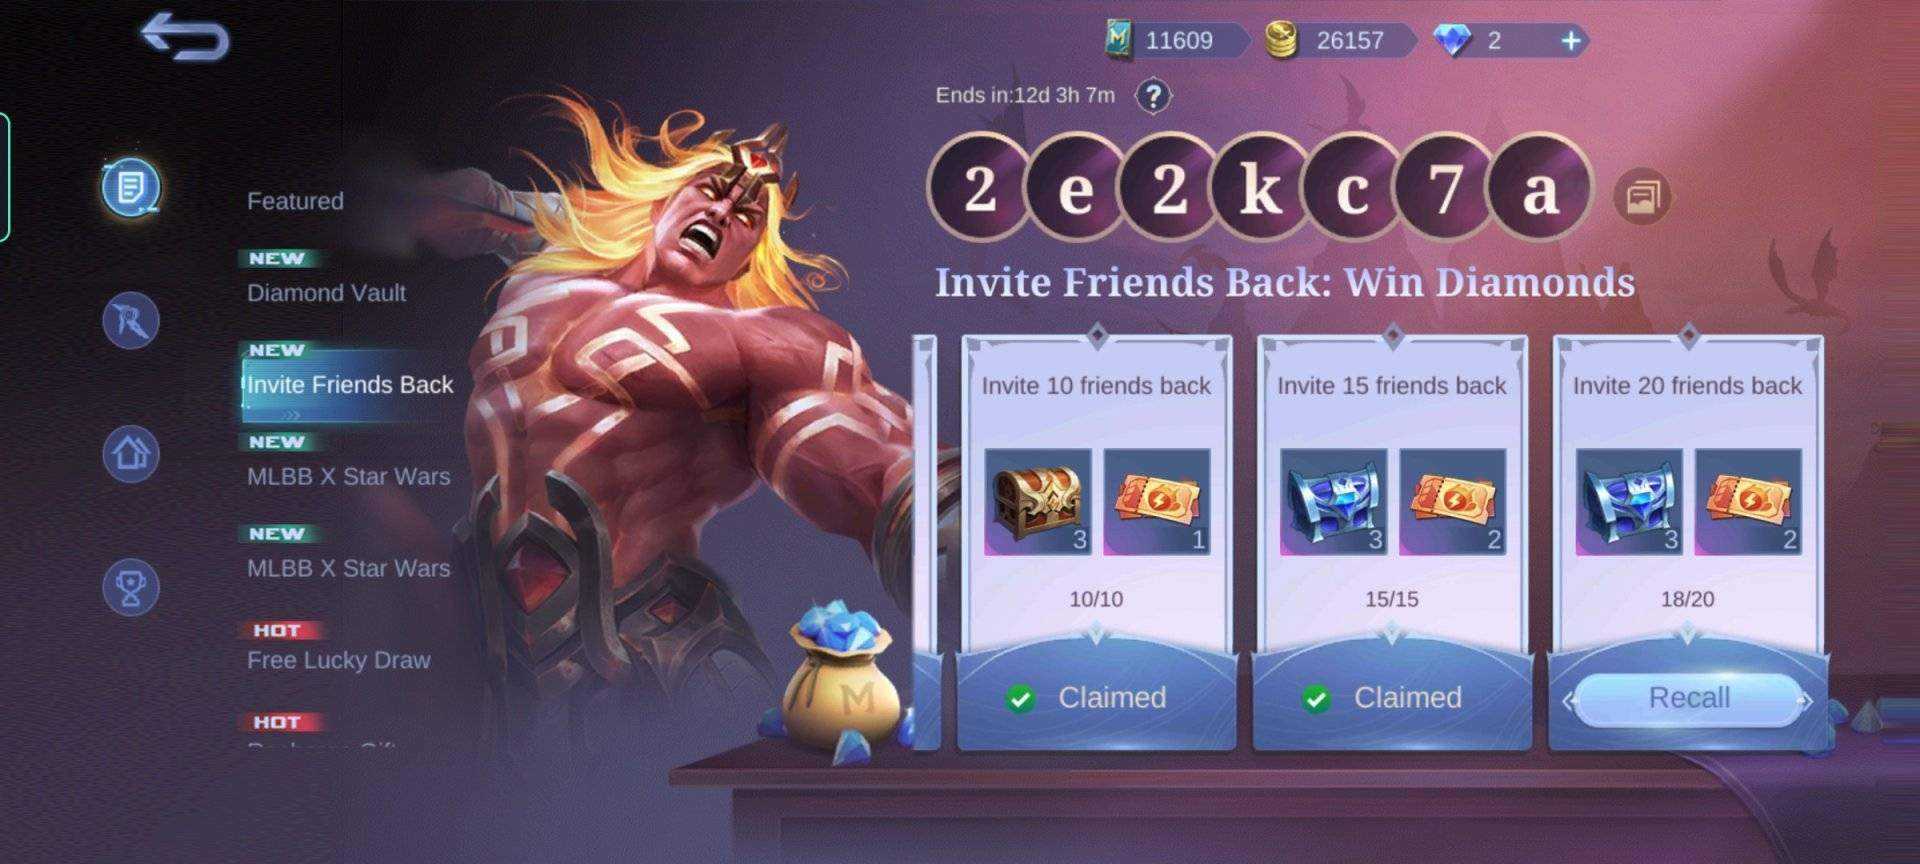 Help - MLBB Invite Friends Back Event [Only Need 2] | Pinoy Internet and  Technology Forums